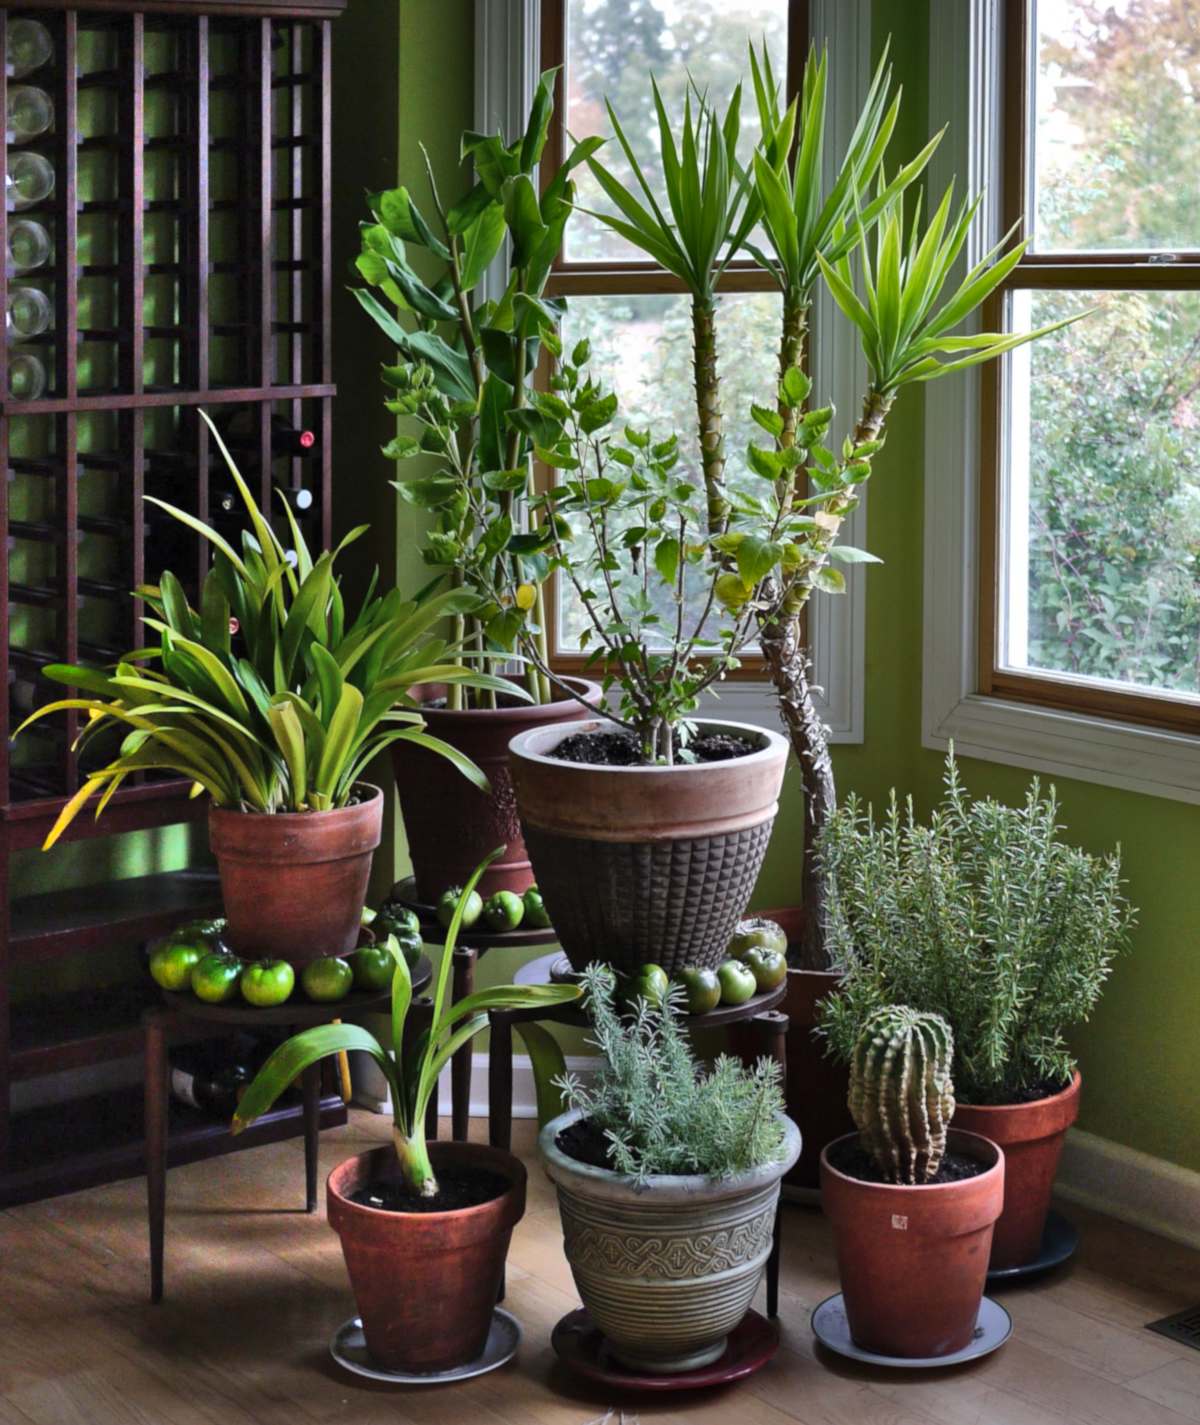 How to increase humidity for indoor plants